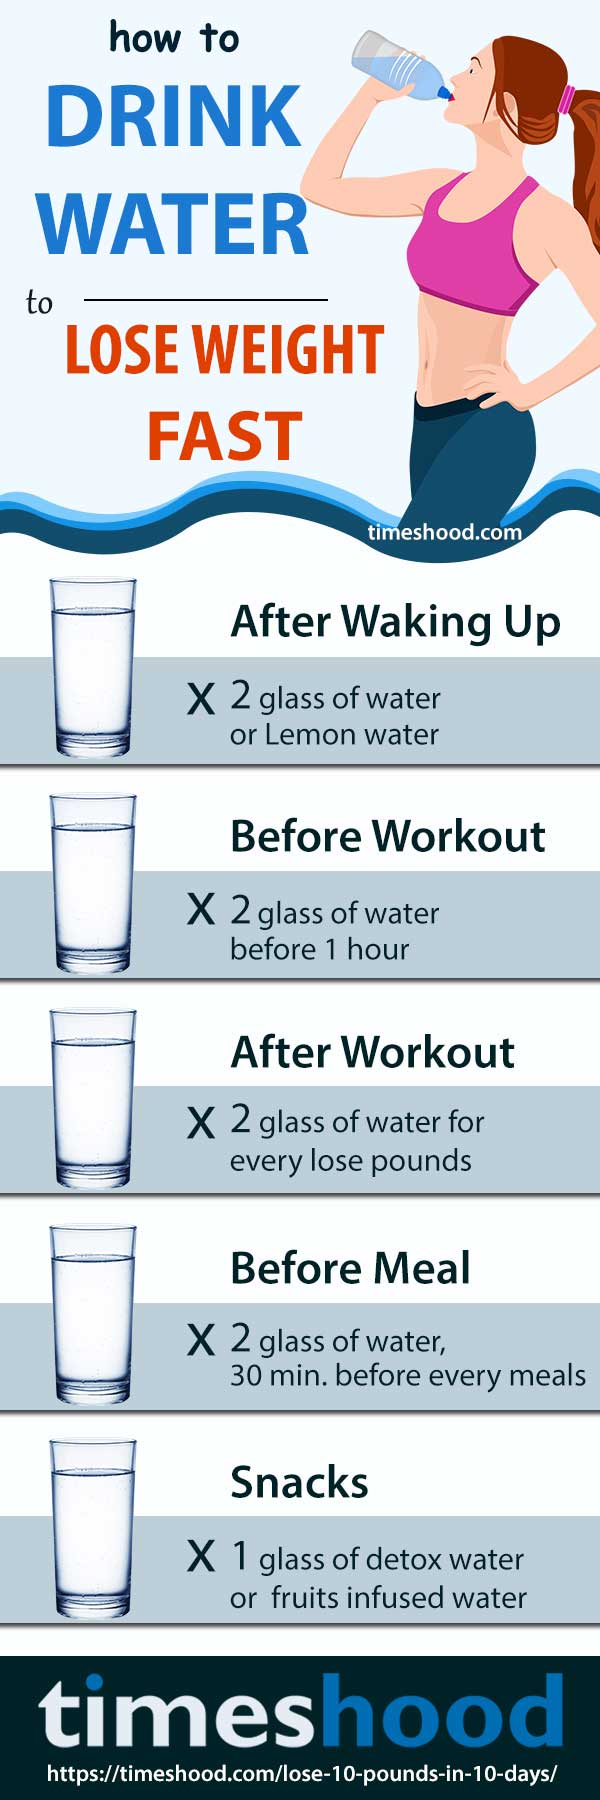 How much water you should drink for weigh loss fast. Check out 1000 calories workout plan to lose weight fast.